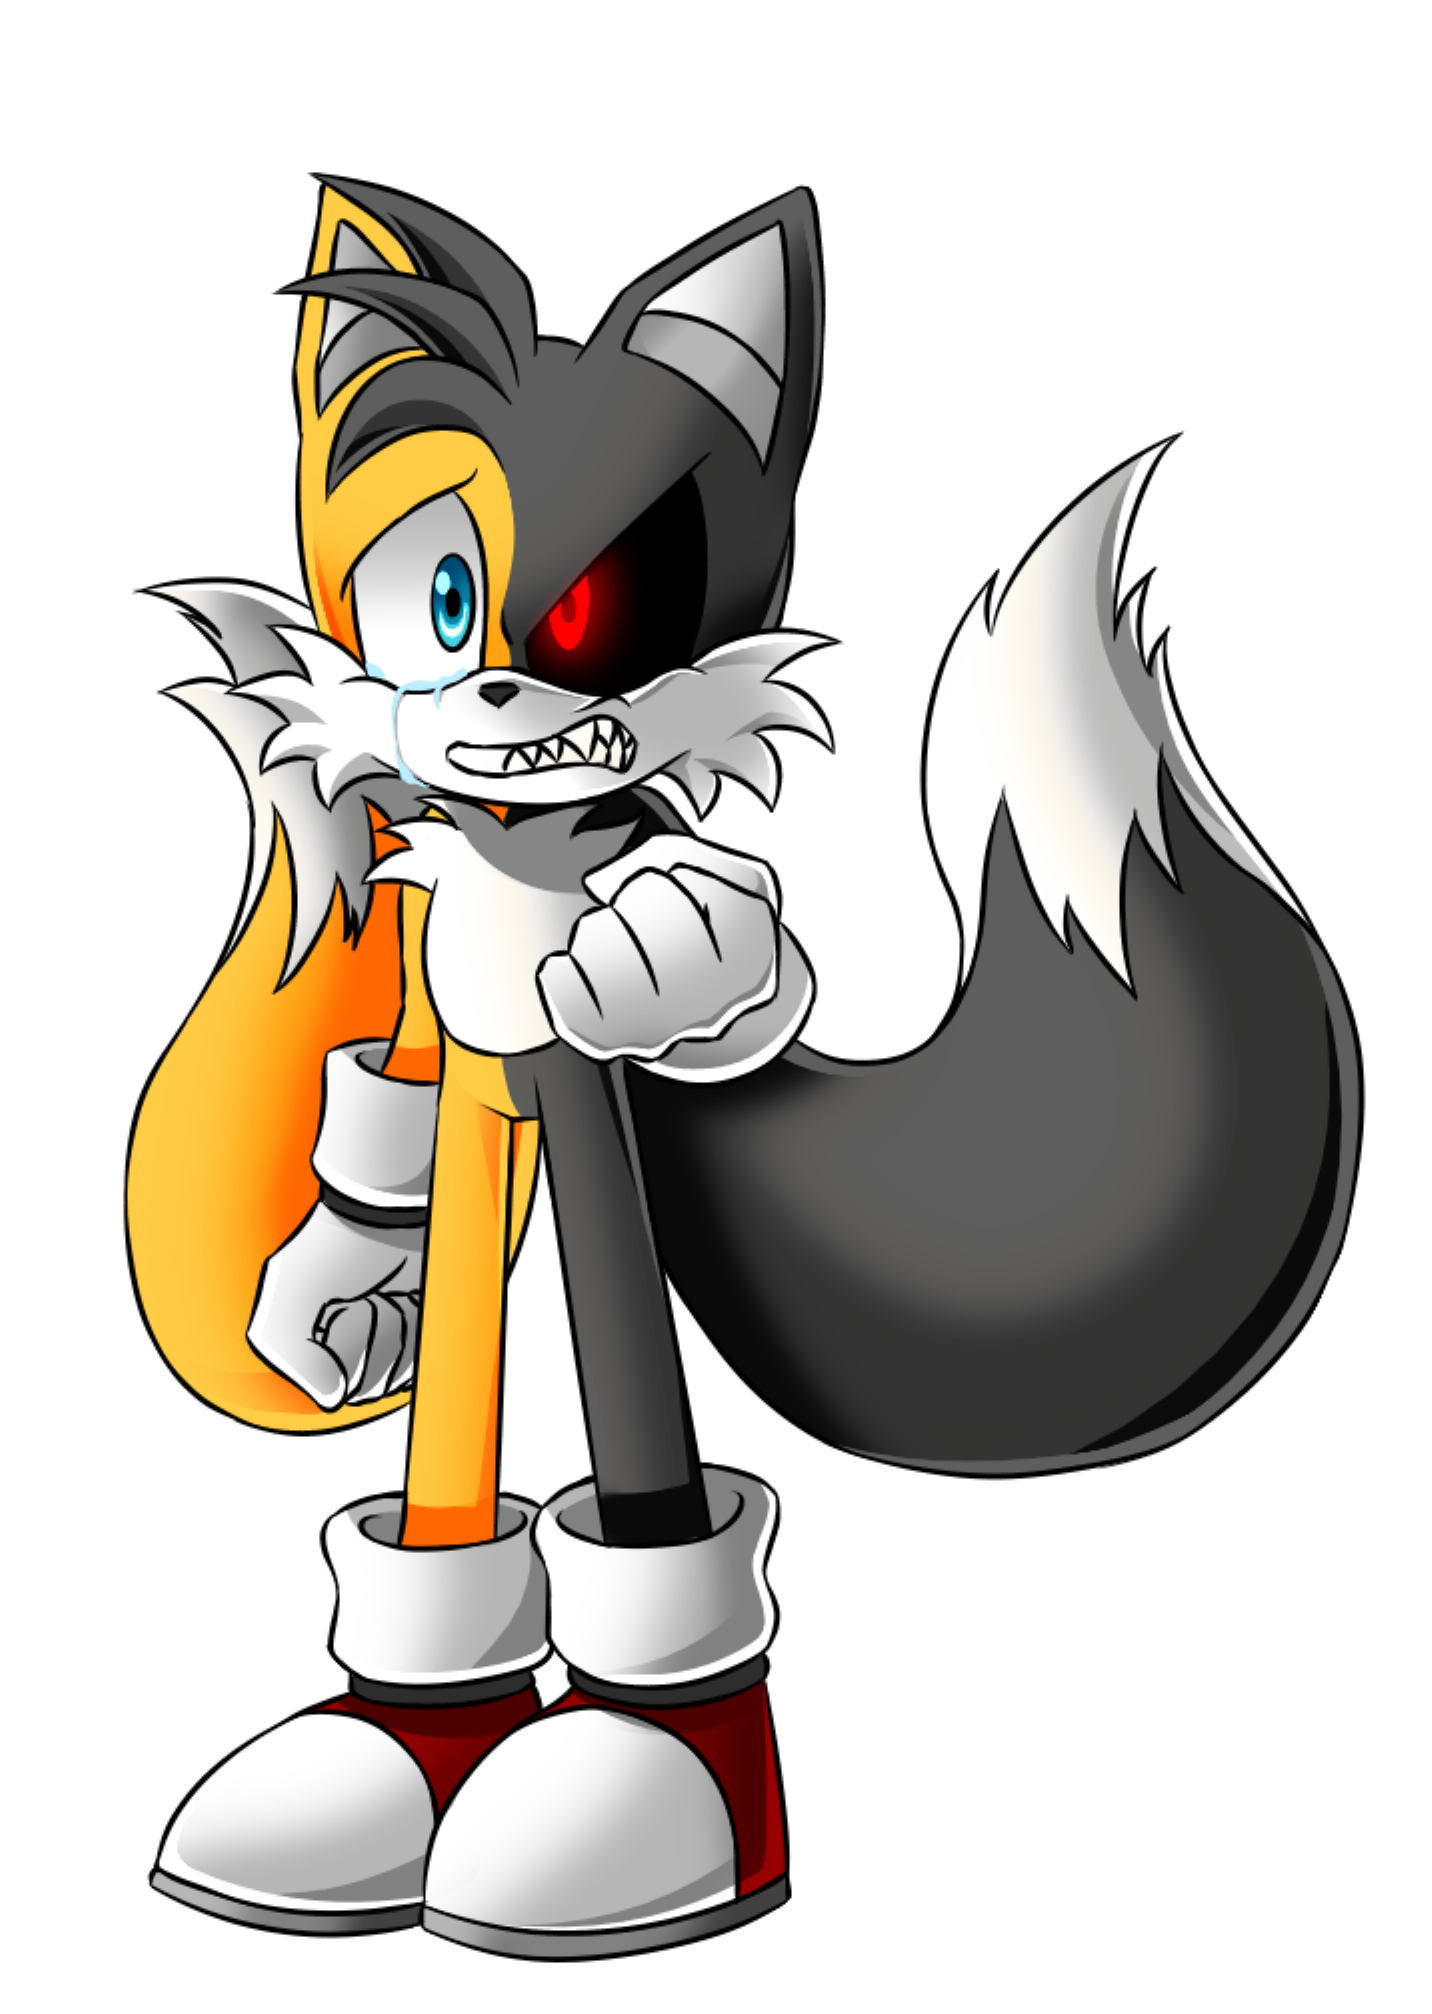 Tails.EXE by poppingperi on DeviantArt